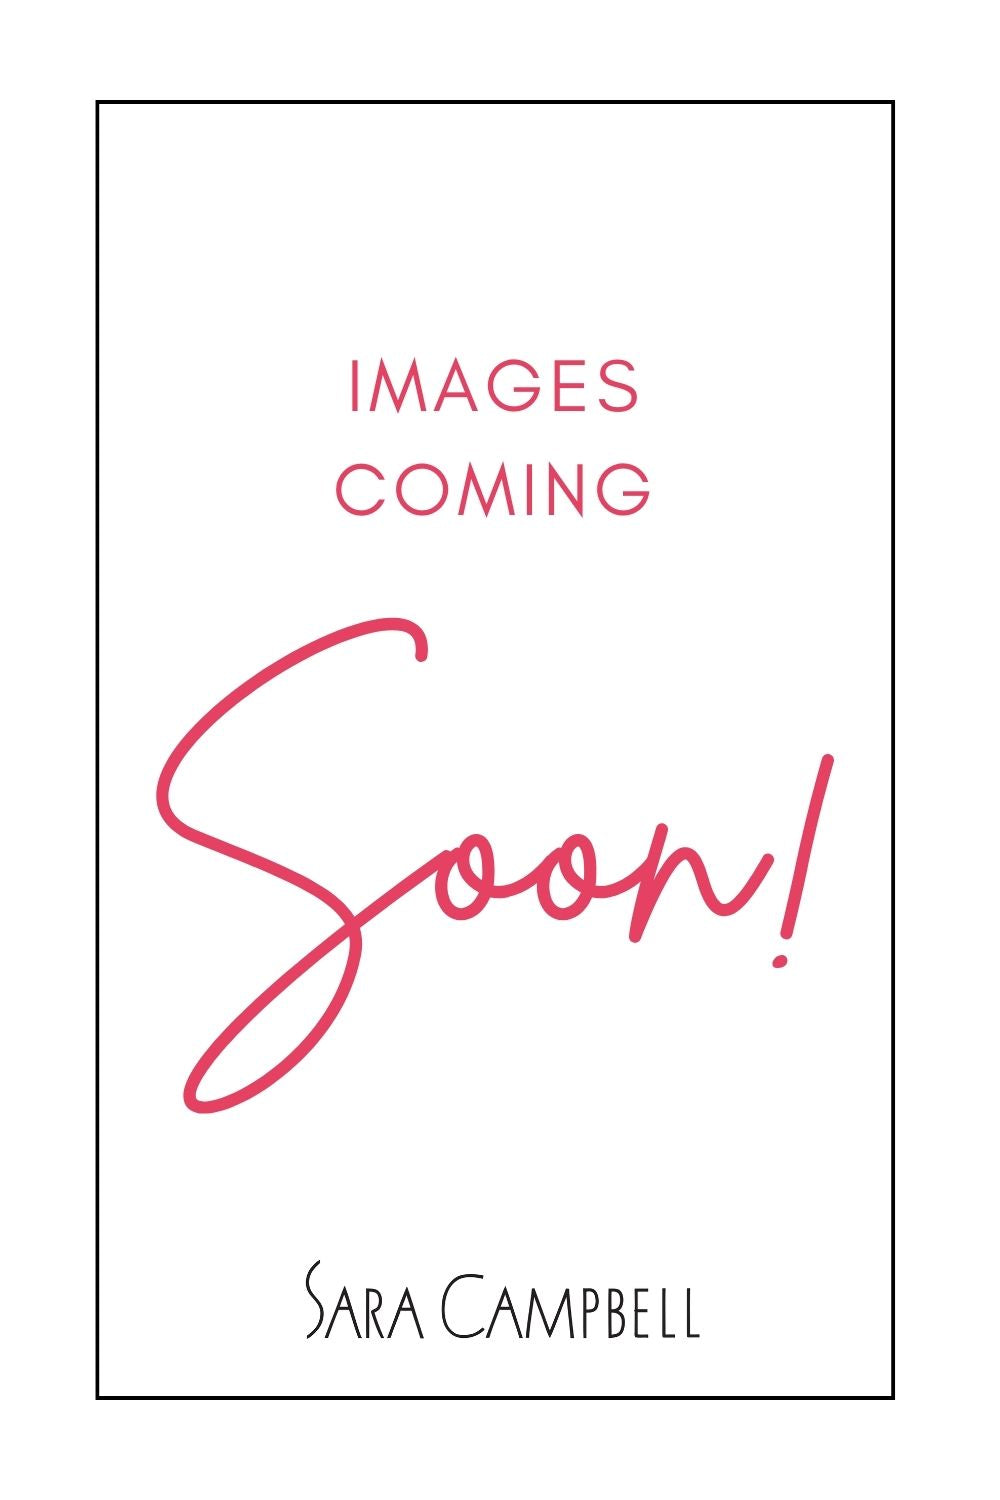 Graphic that reads "Images Coming Soon"